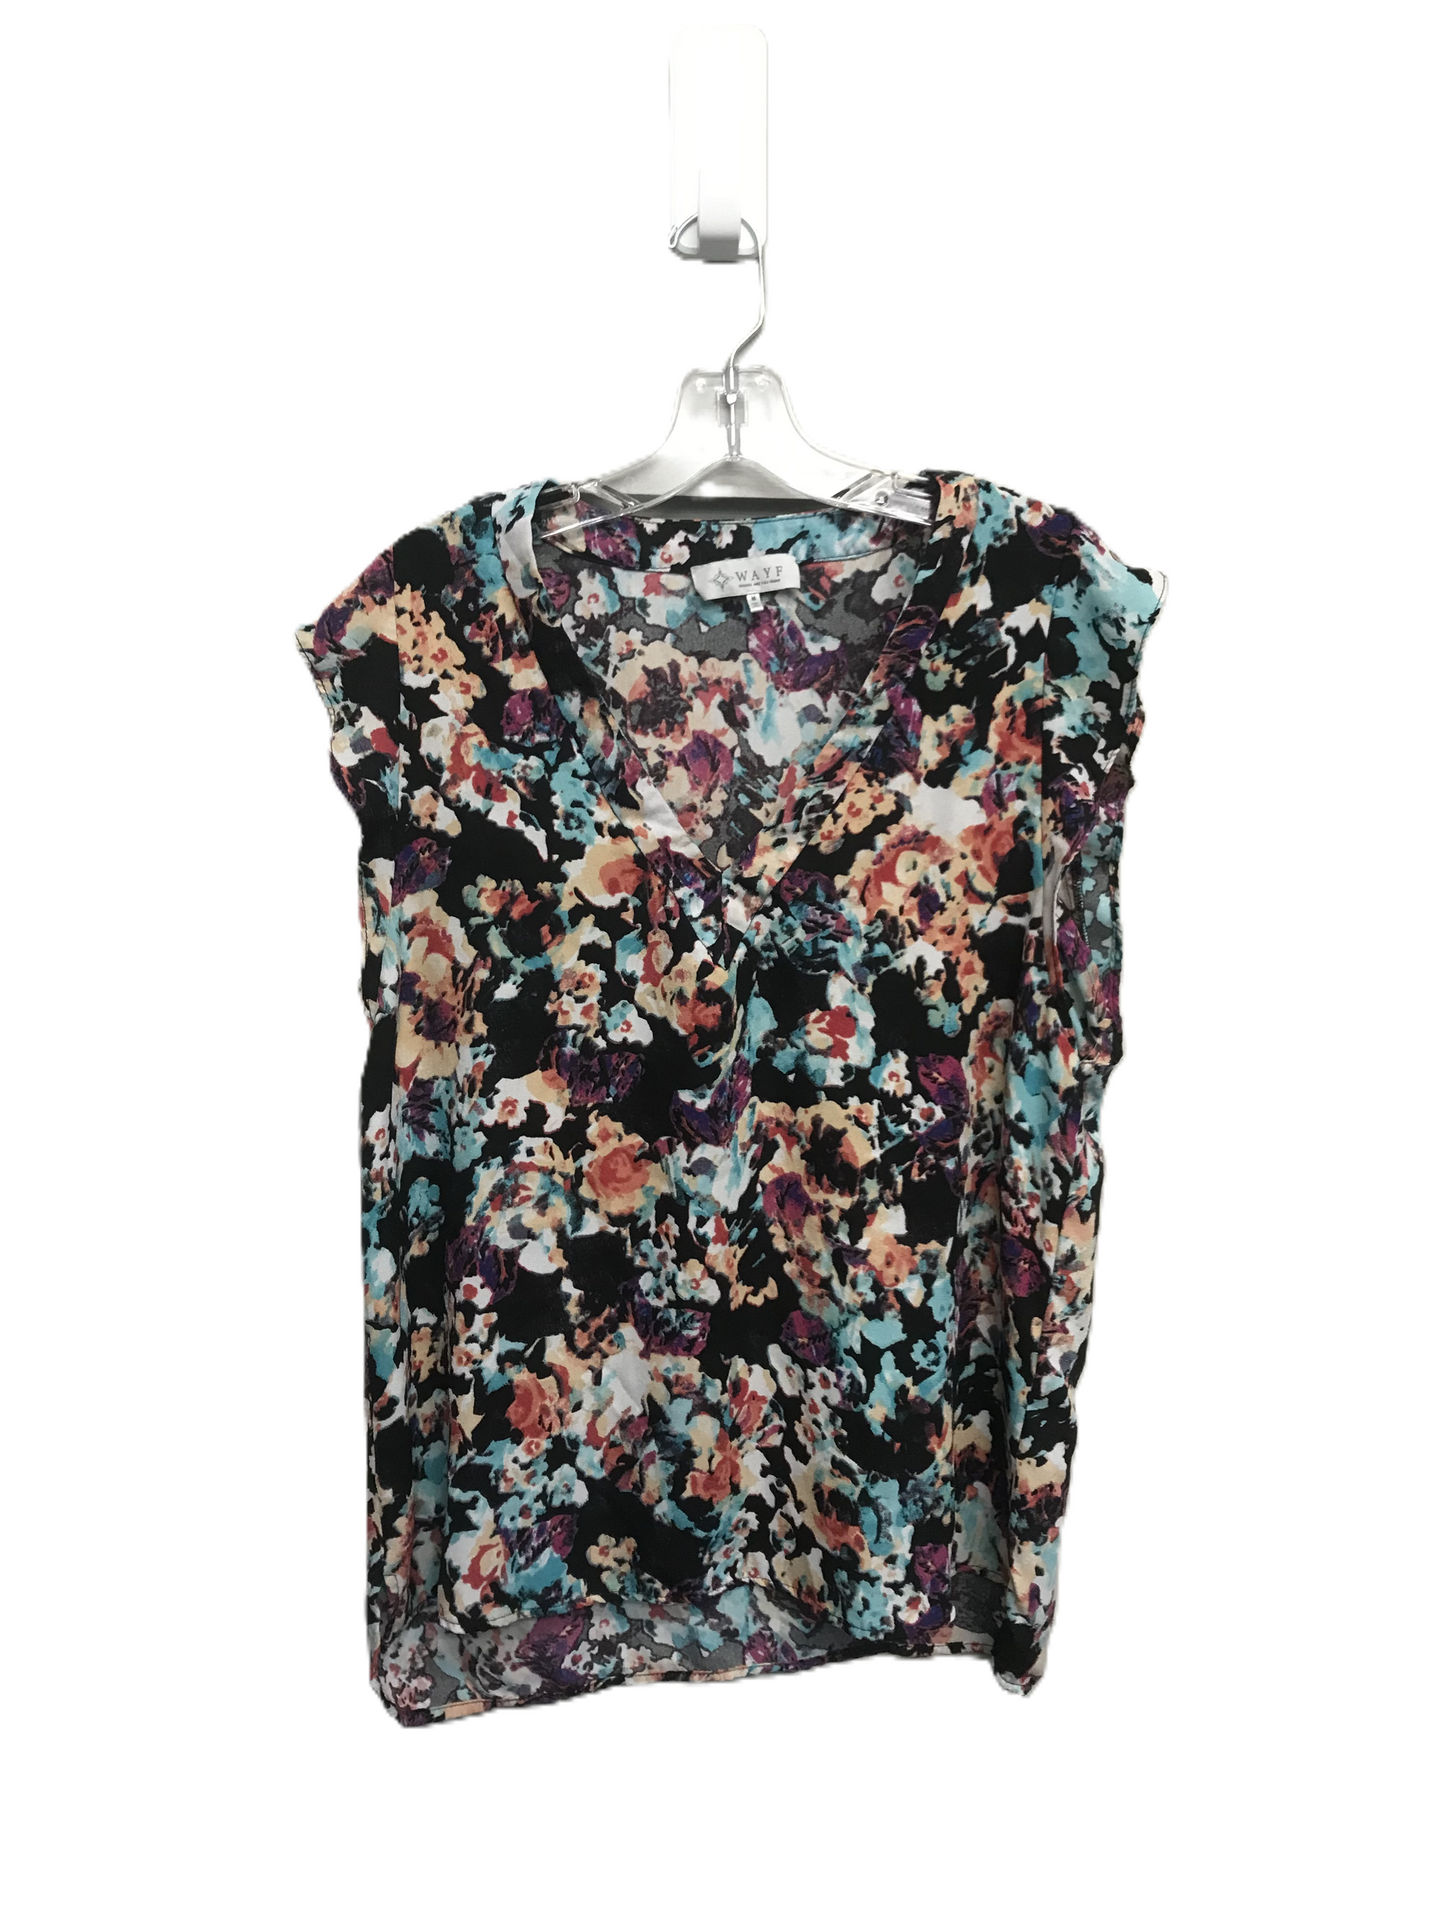 Top Sleeveless By Wayf  Size: M